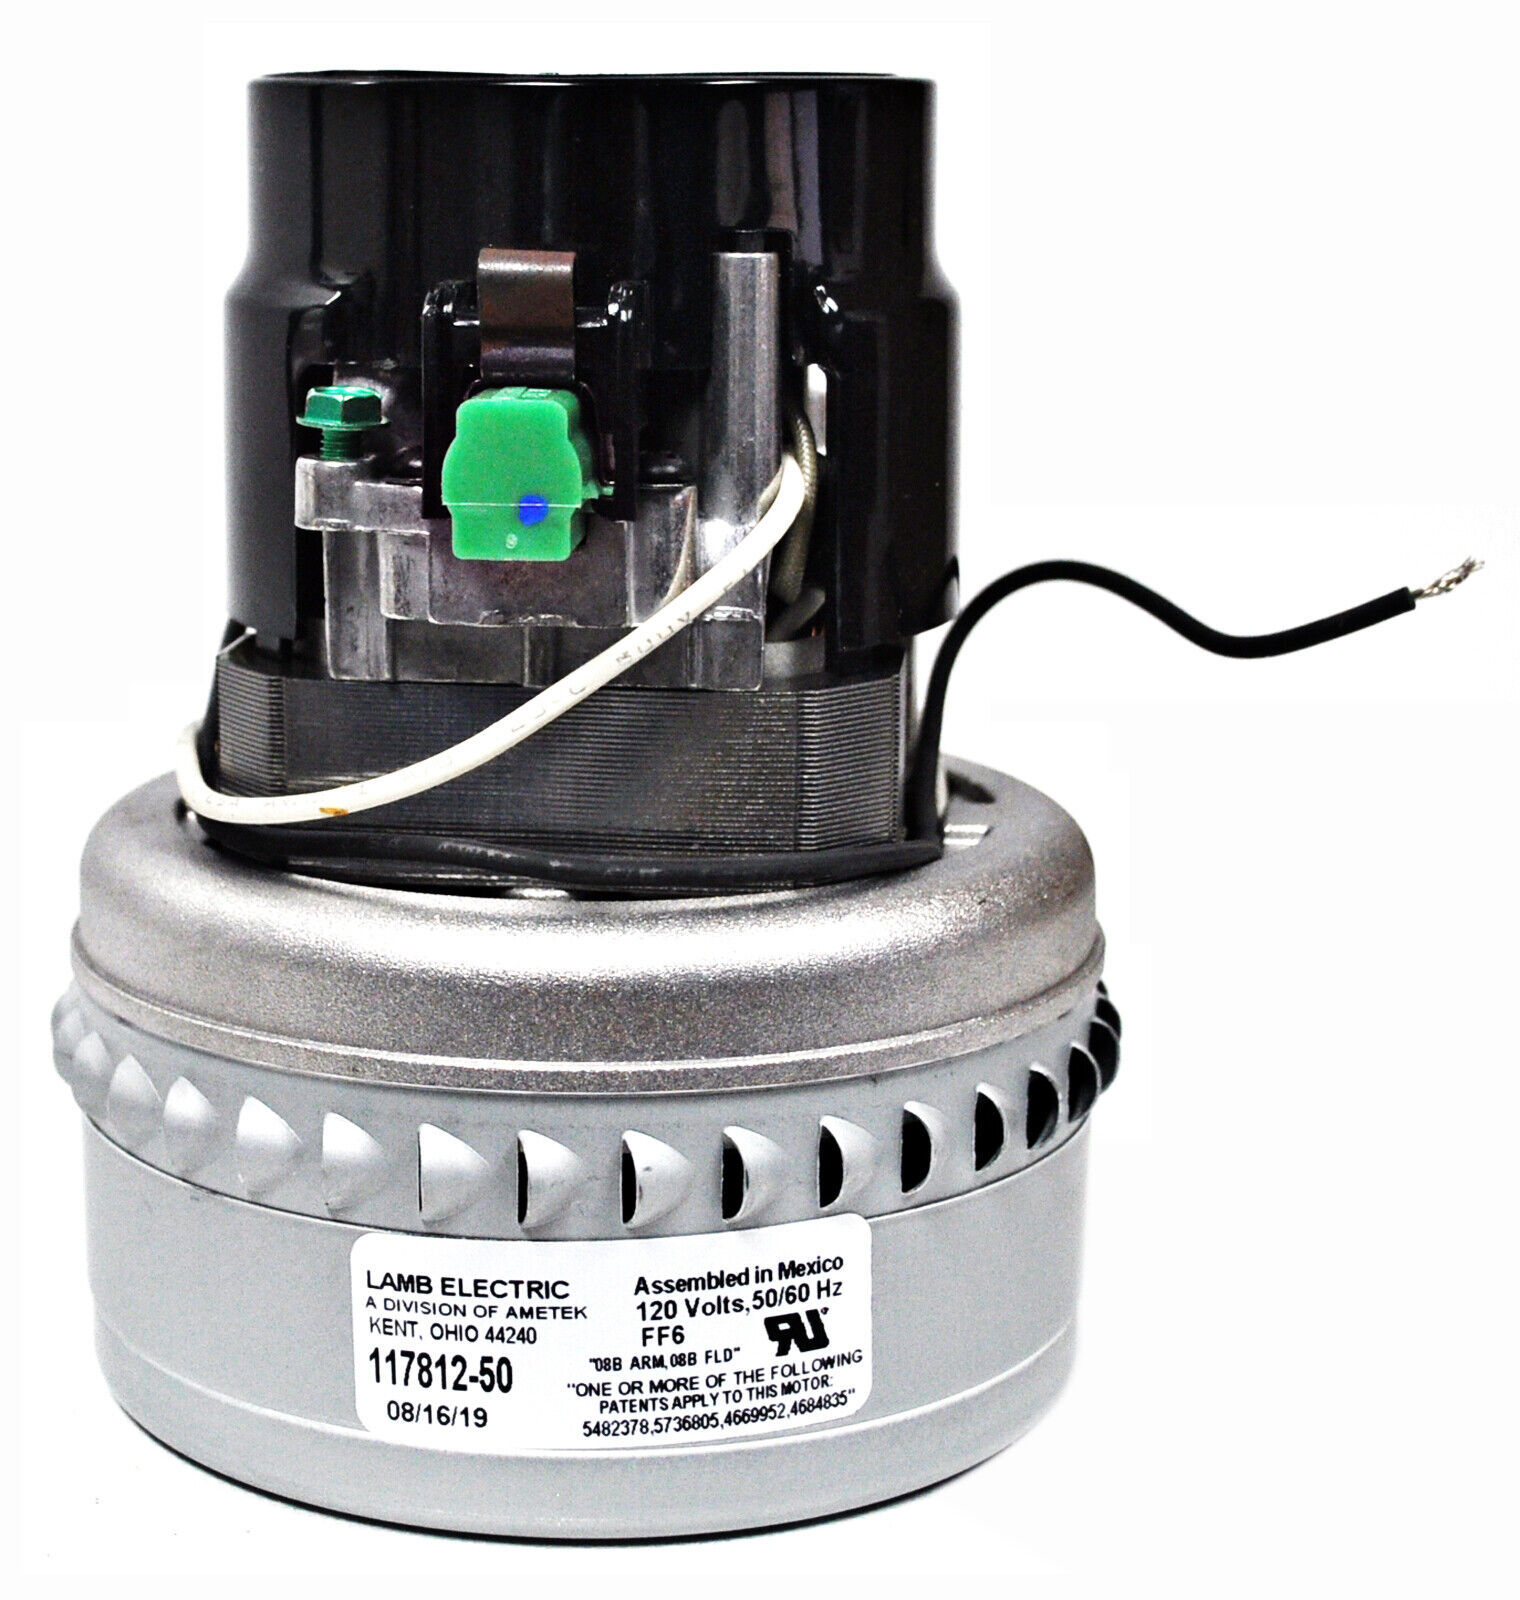 Primary image for Ametek Lamb 4.8 Inch 2 Stage 120 Volt B/S Peripheral Bypass Motor 117812-50